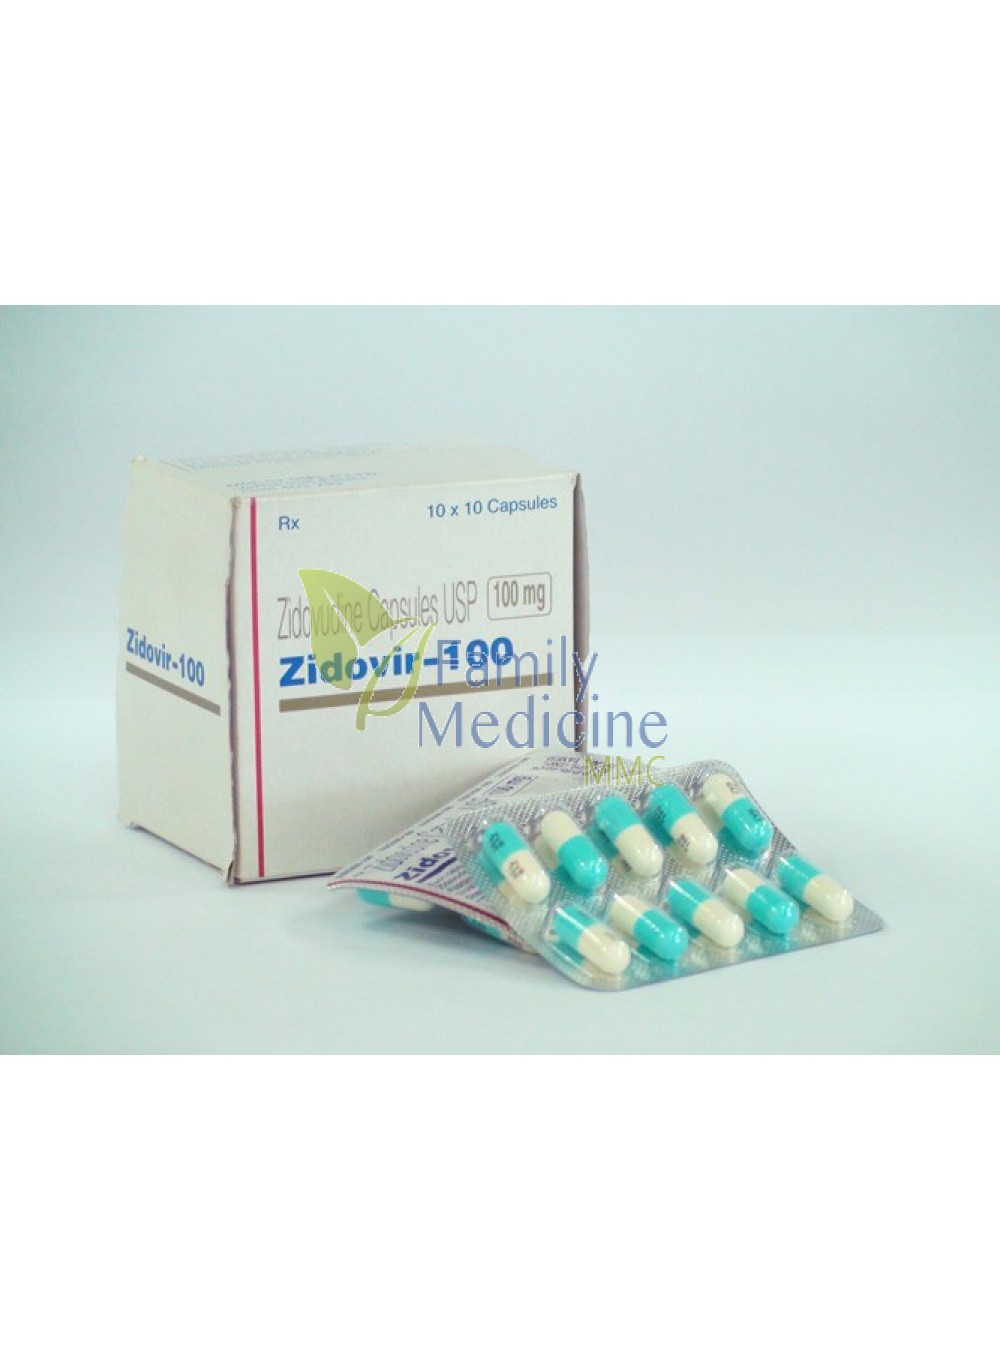 Ivermectin heartworm medicine for dogs